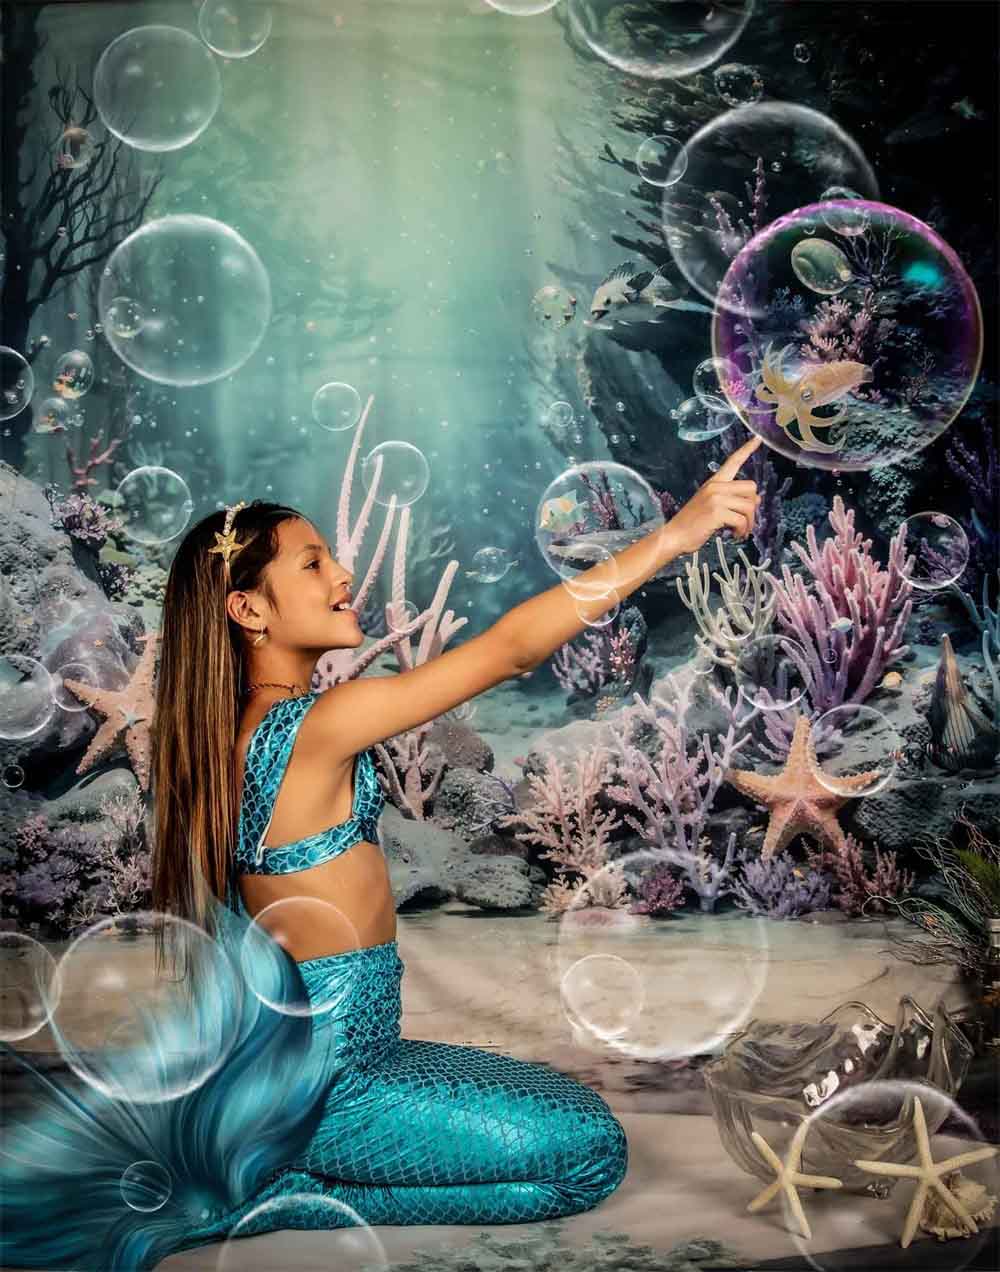 Kate Summer Underwater World Reef Backdrop Designed by Chain Photography